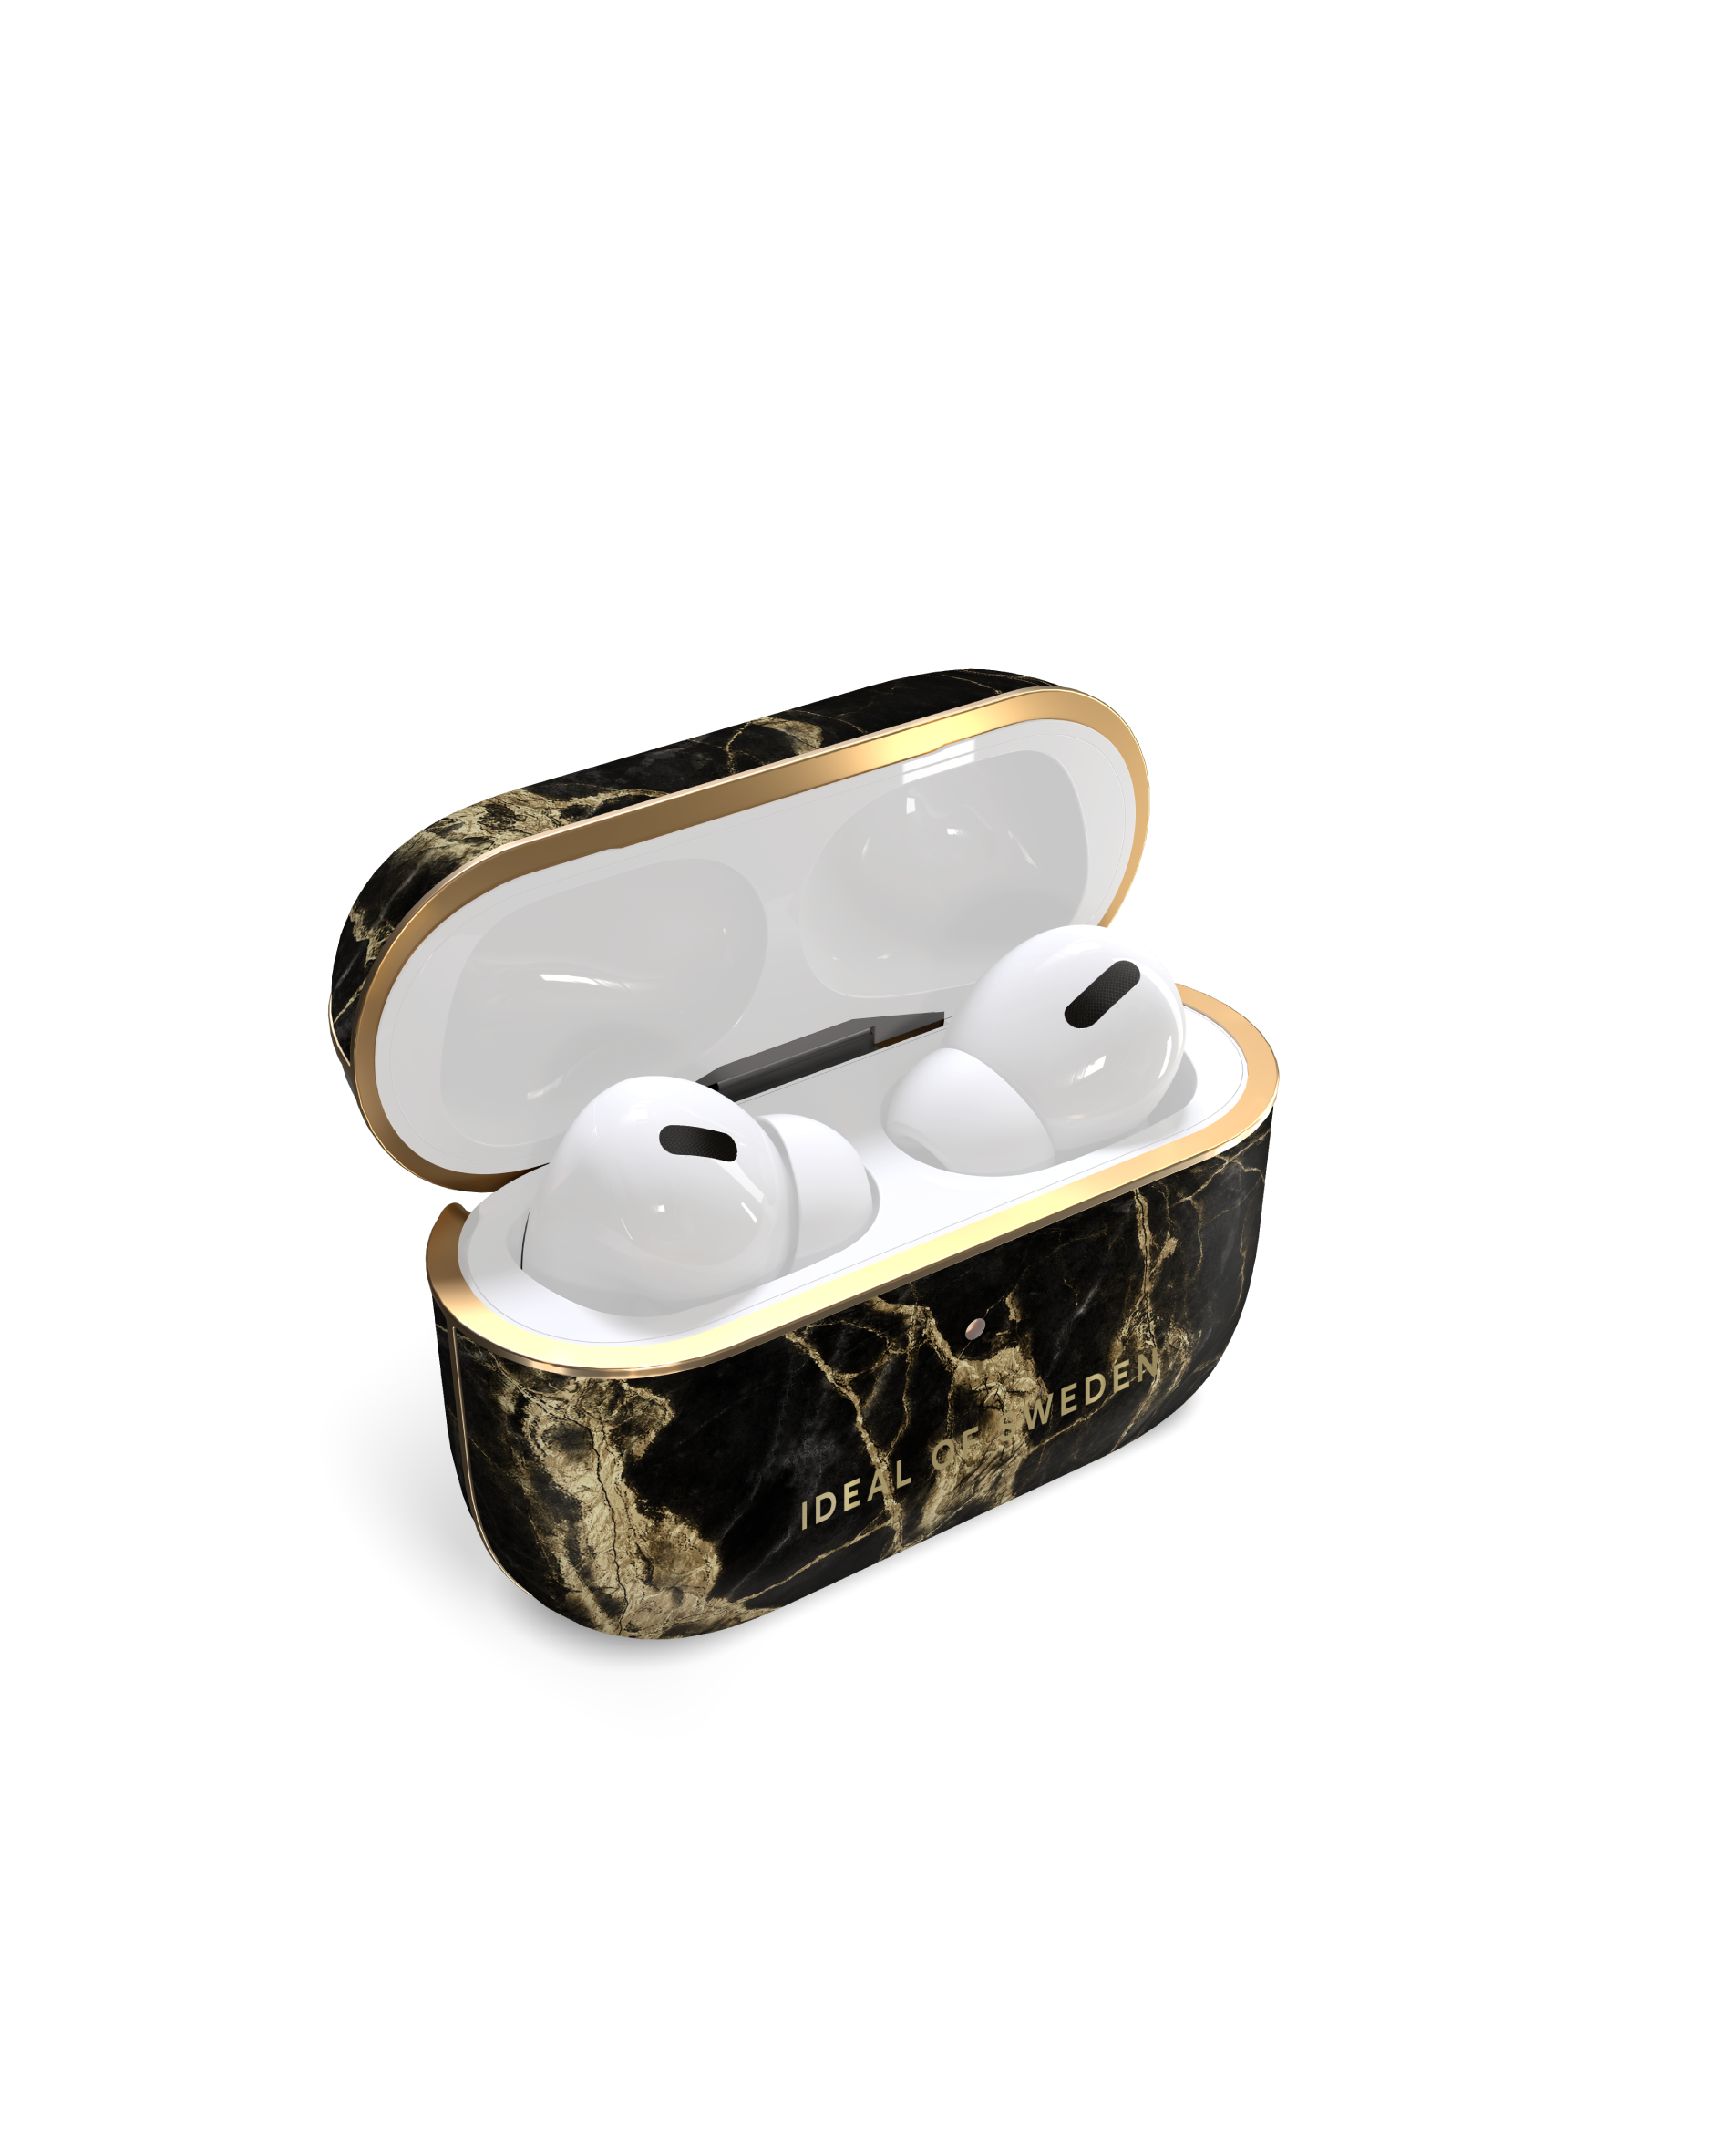 Smoke Marble AirPod Full SWEDEN Cover IDFAPC-PRO-191 Apple passend Golden für: IDEAL OF Case